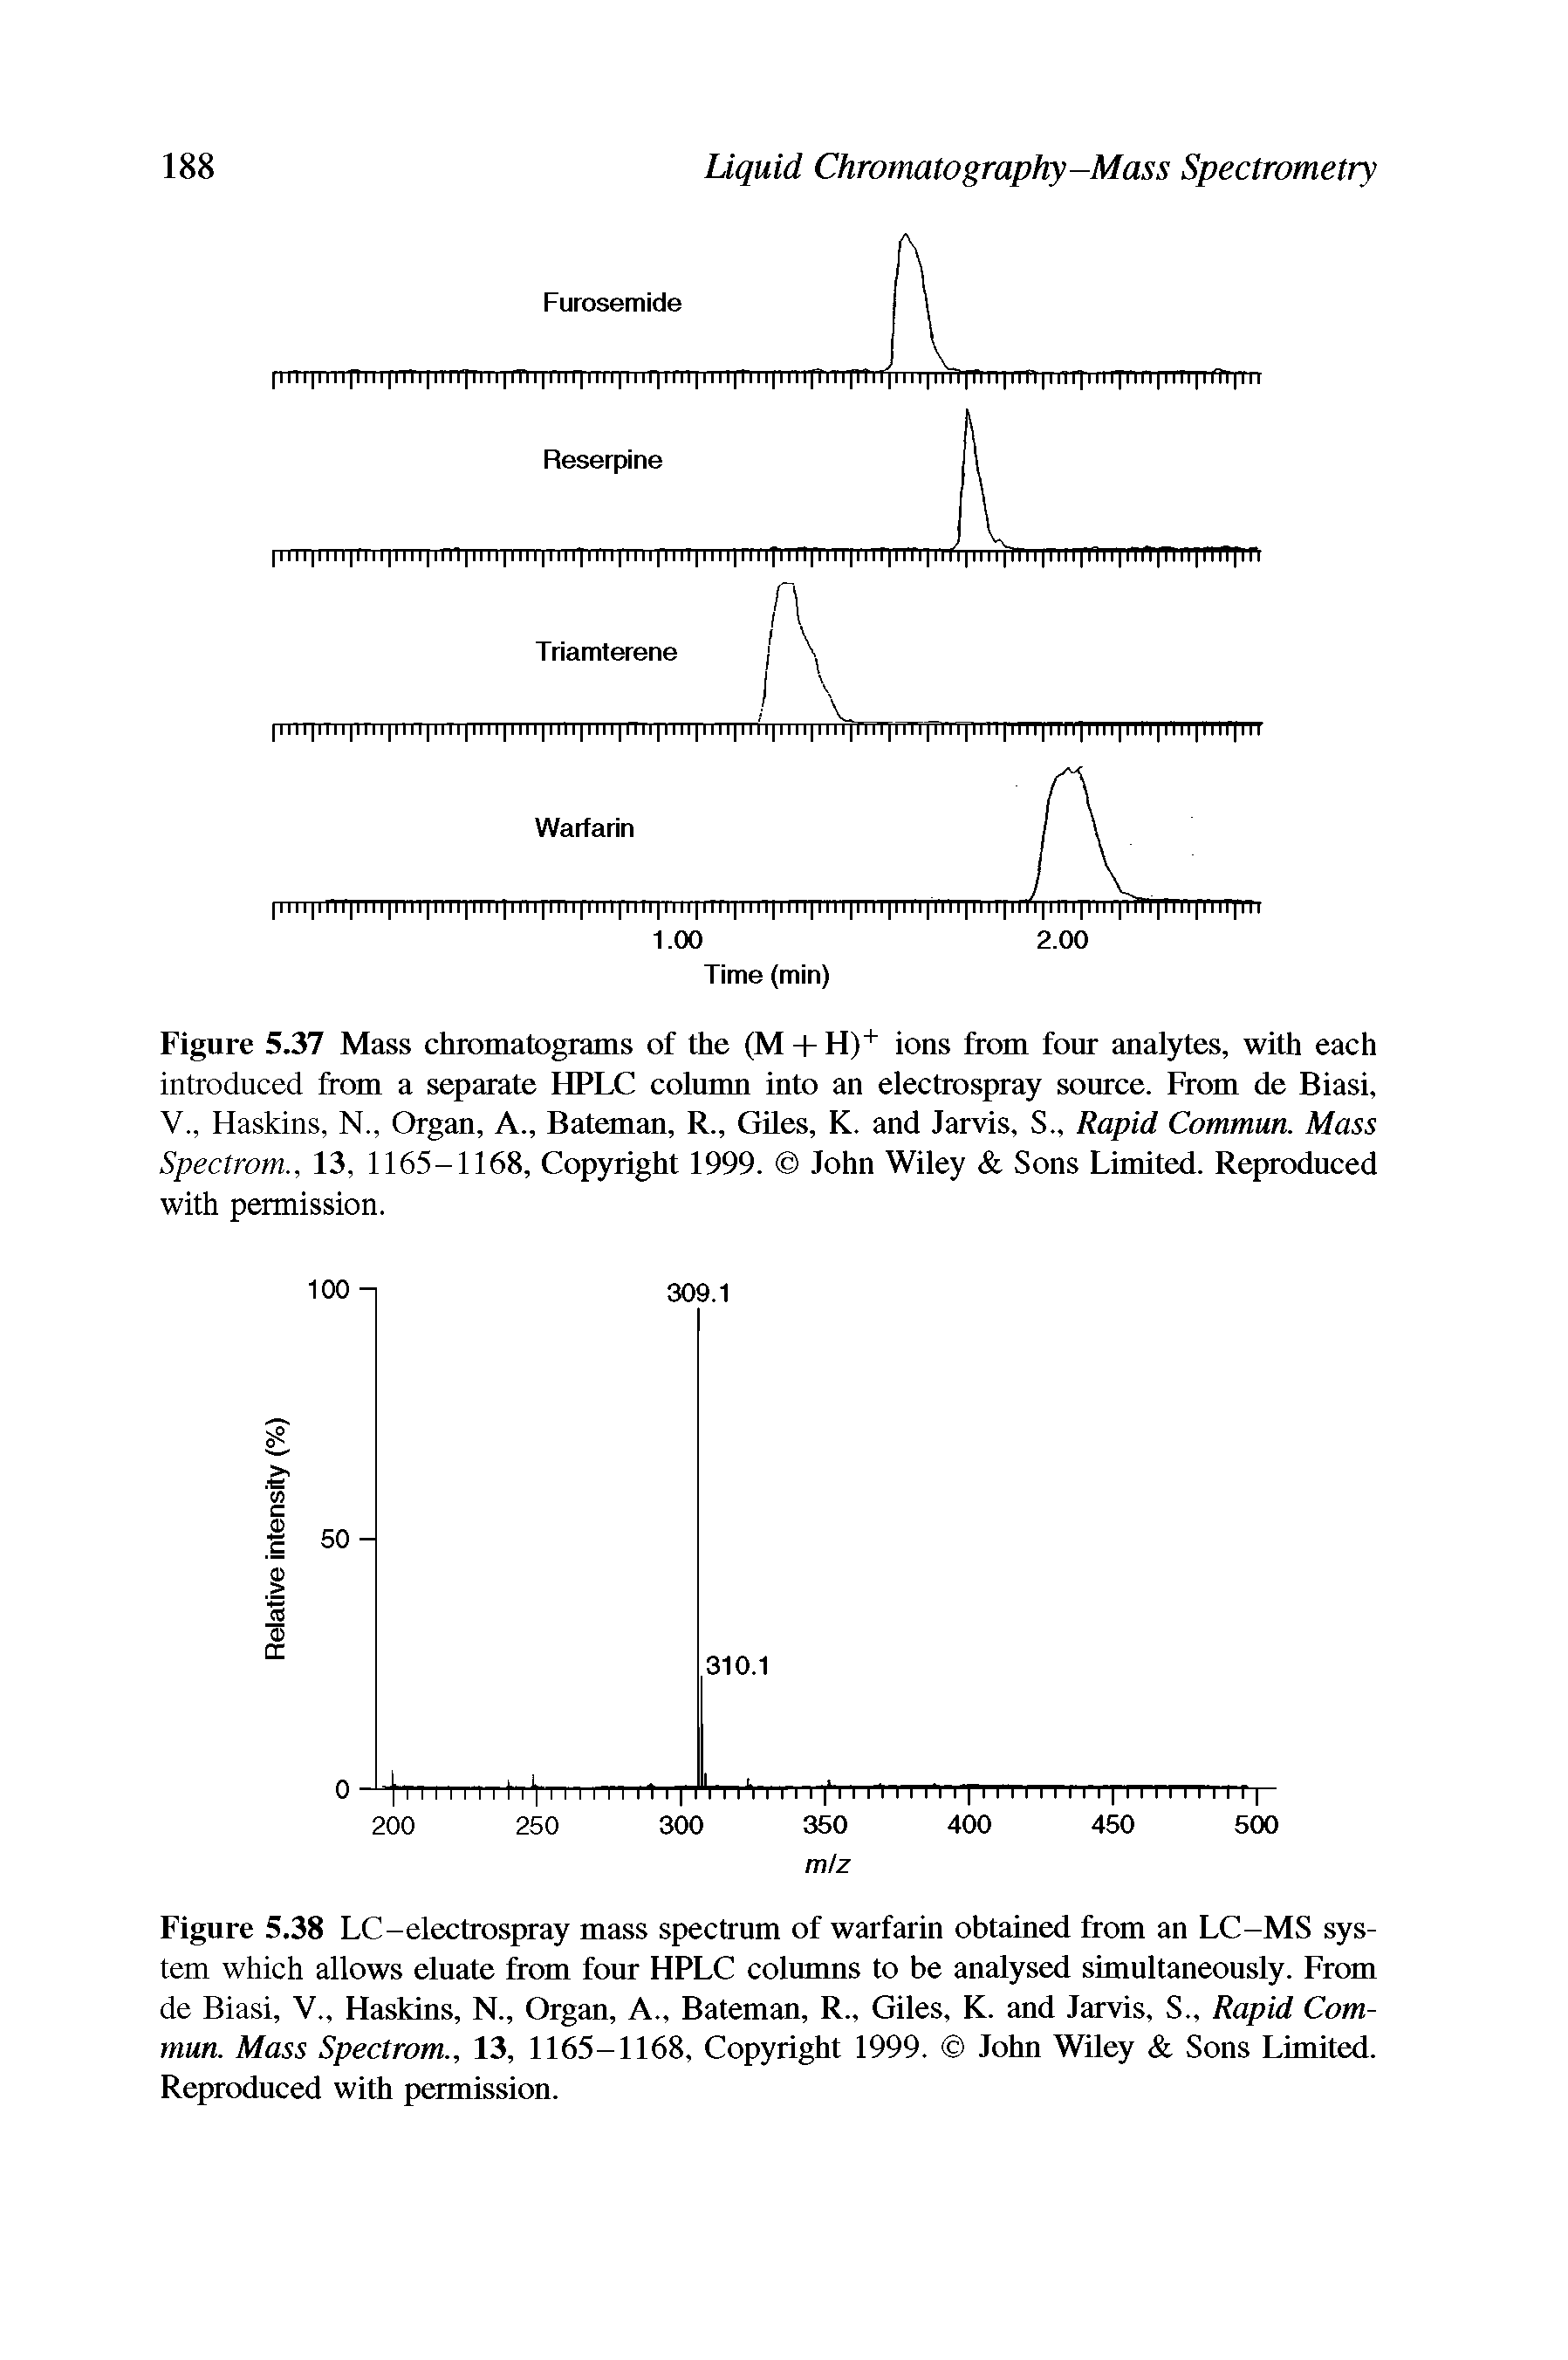 Figure 5.38 LC-electrospray mass spectrum of warfarin obtained from an LC-MS system which allows eluate from four HPLC columns to be analysed simultaneously. From de Biasi, V., Haskins, N., Organ, A., Bateman, R., Giles, K. and Jarvis, S., Rapid Commun. Mass Spectrom., 13, 1165-1168, Copyright 1999. John Wiley Sons Limited. Reproduced with permission.